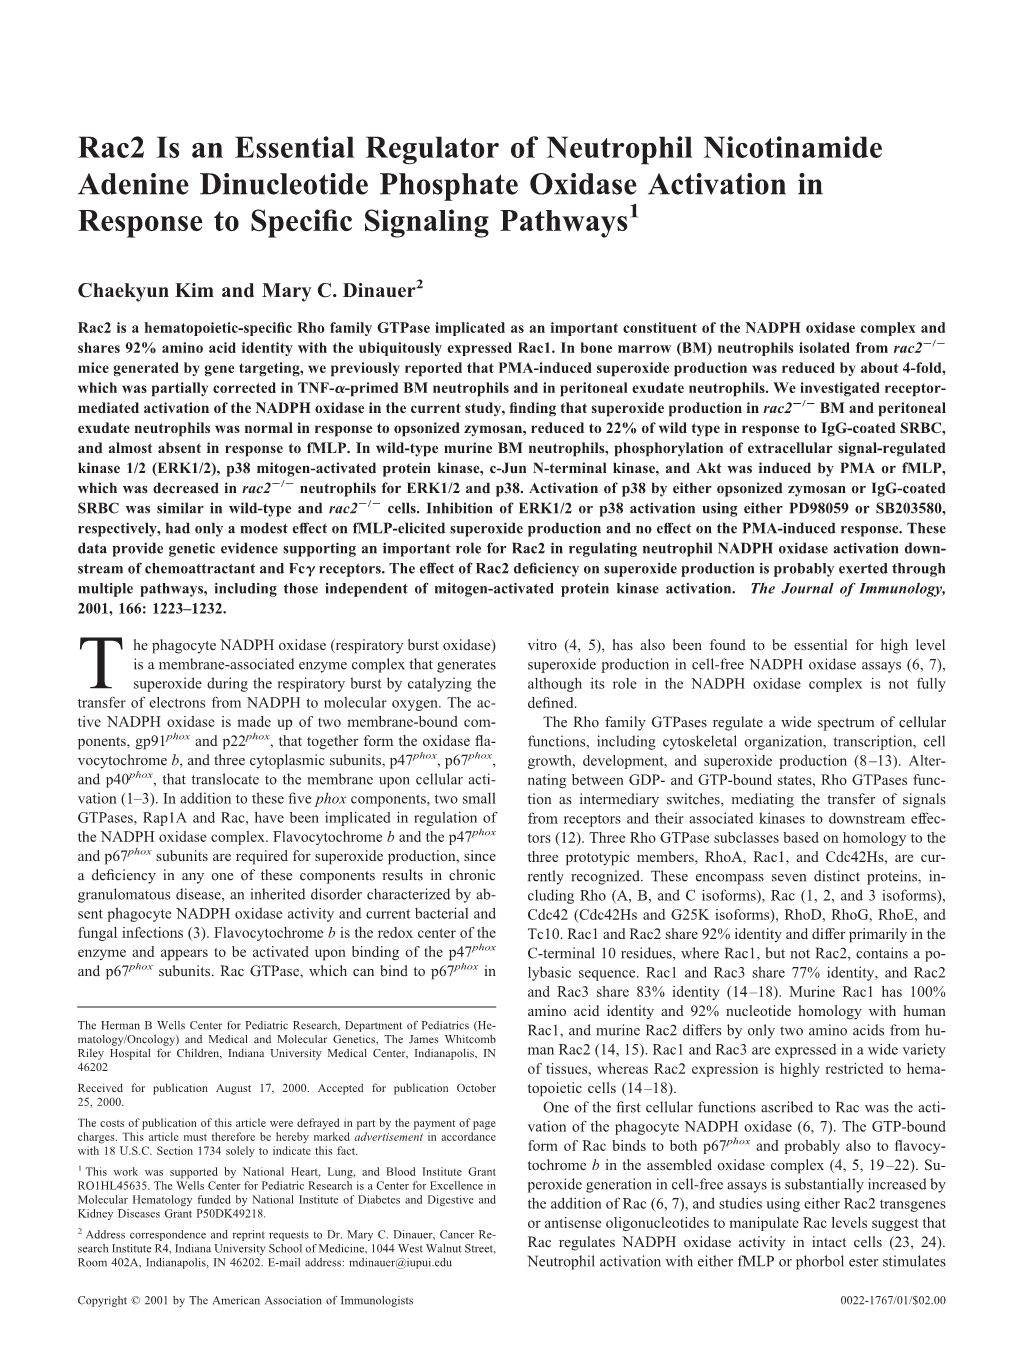 Specific Signaling Pathways Phosphate Oxidase Activation In